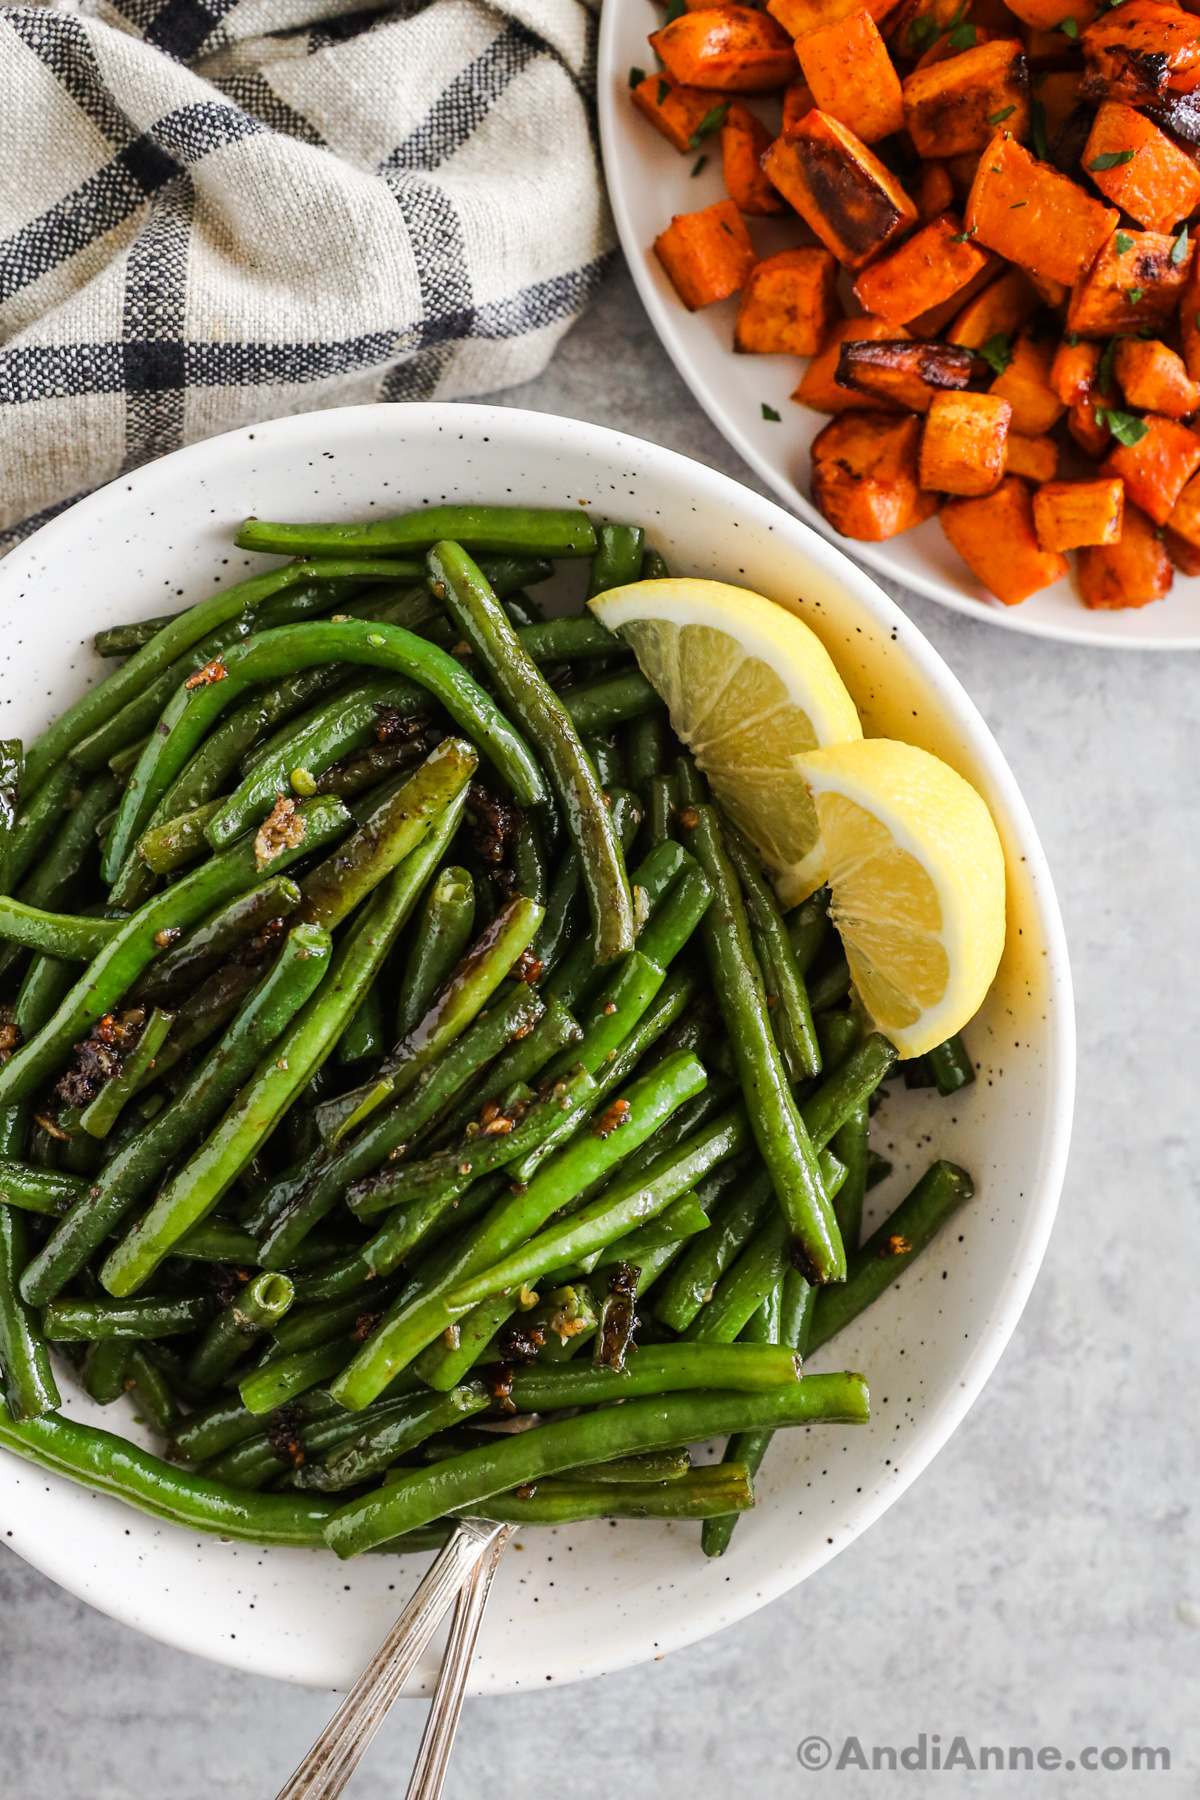 A plate of green beans with lemon wedges. A plate of baked chopped sweet potatoes beside.